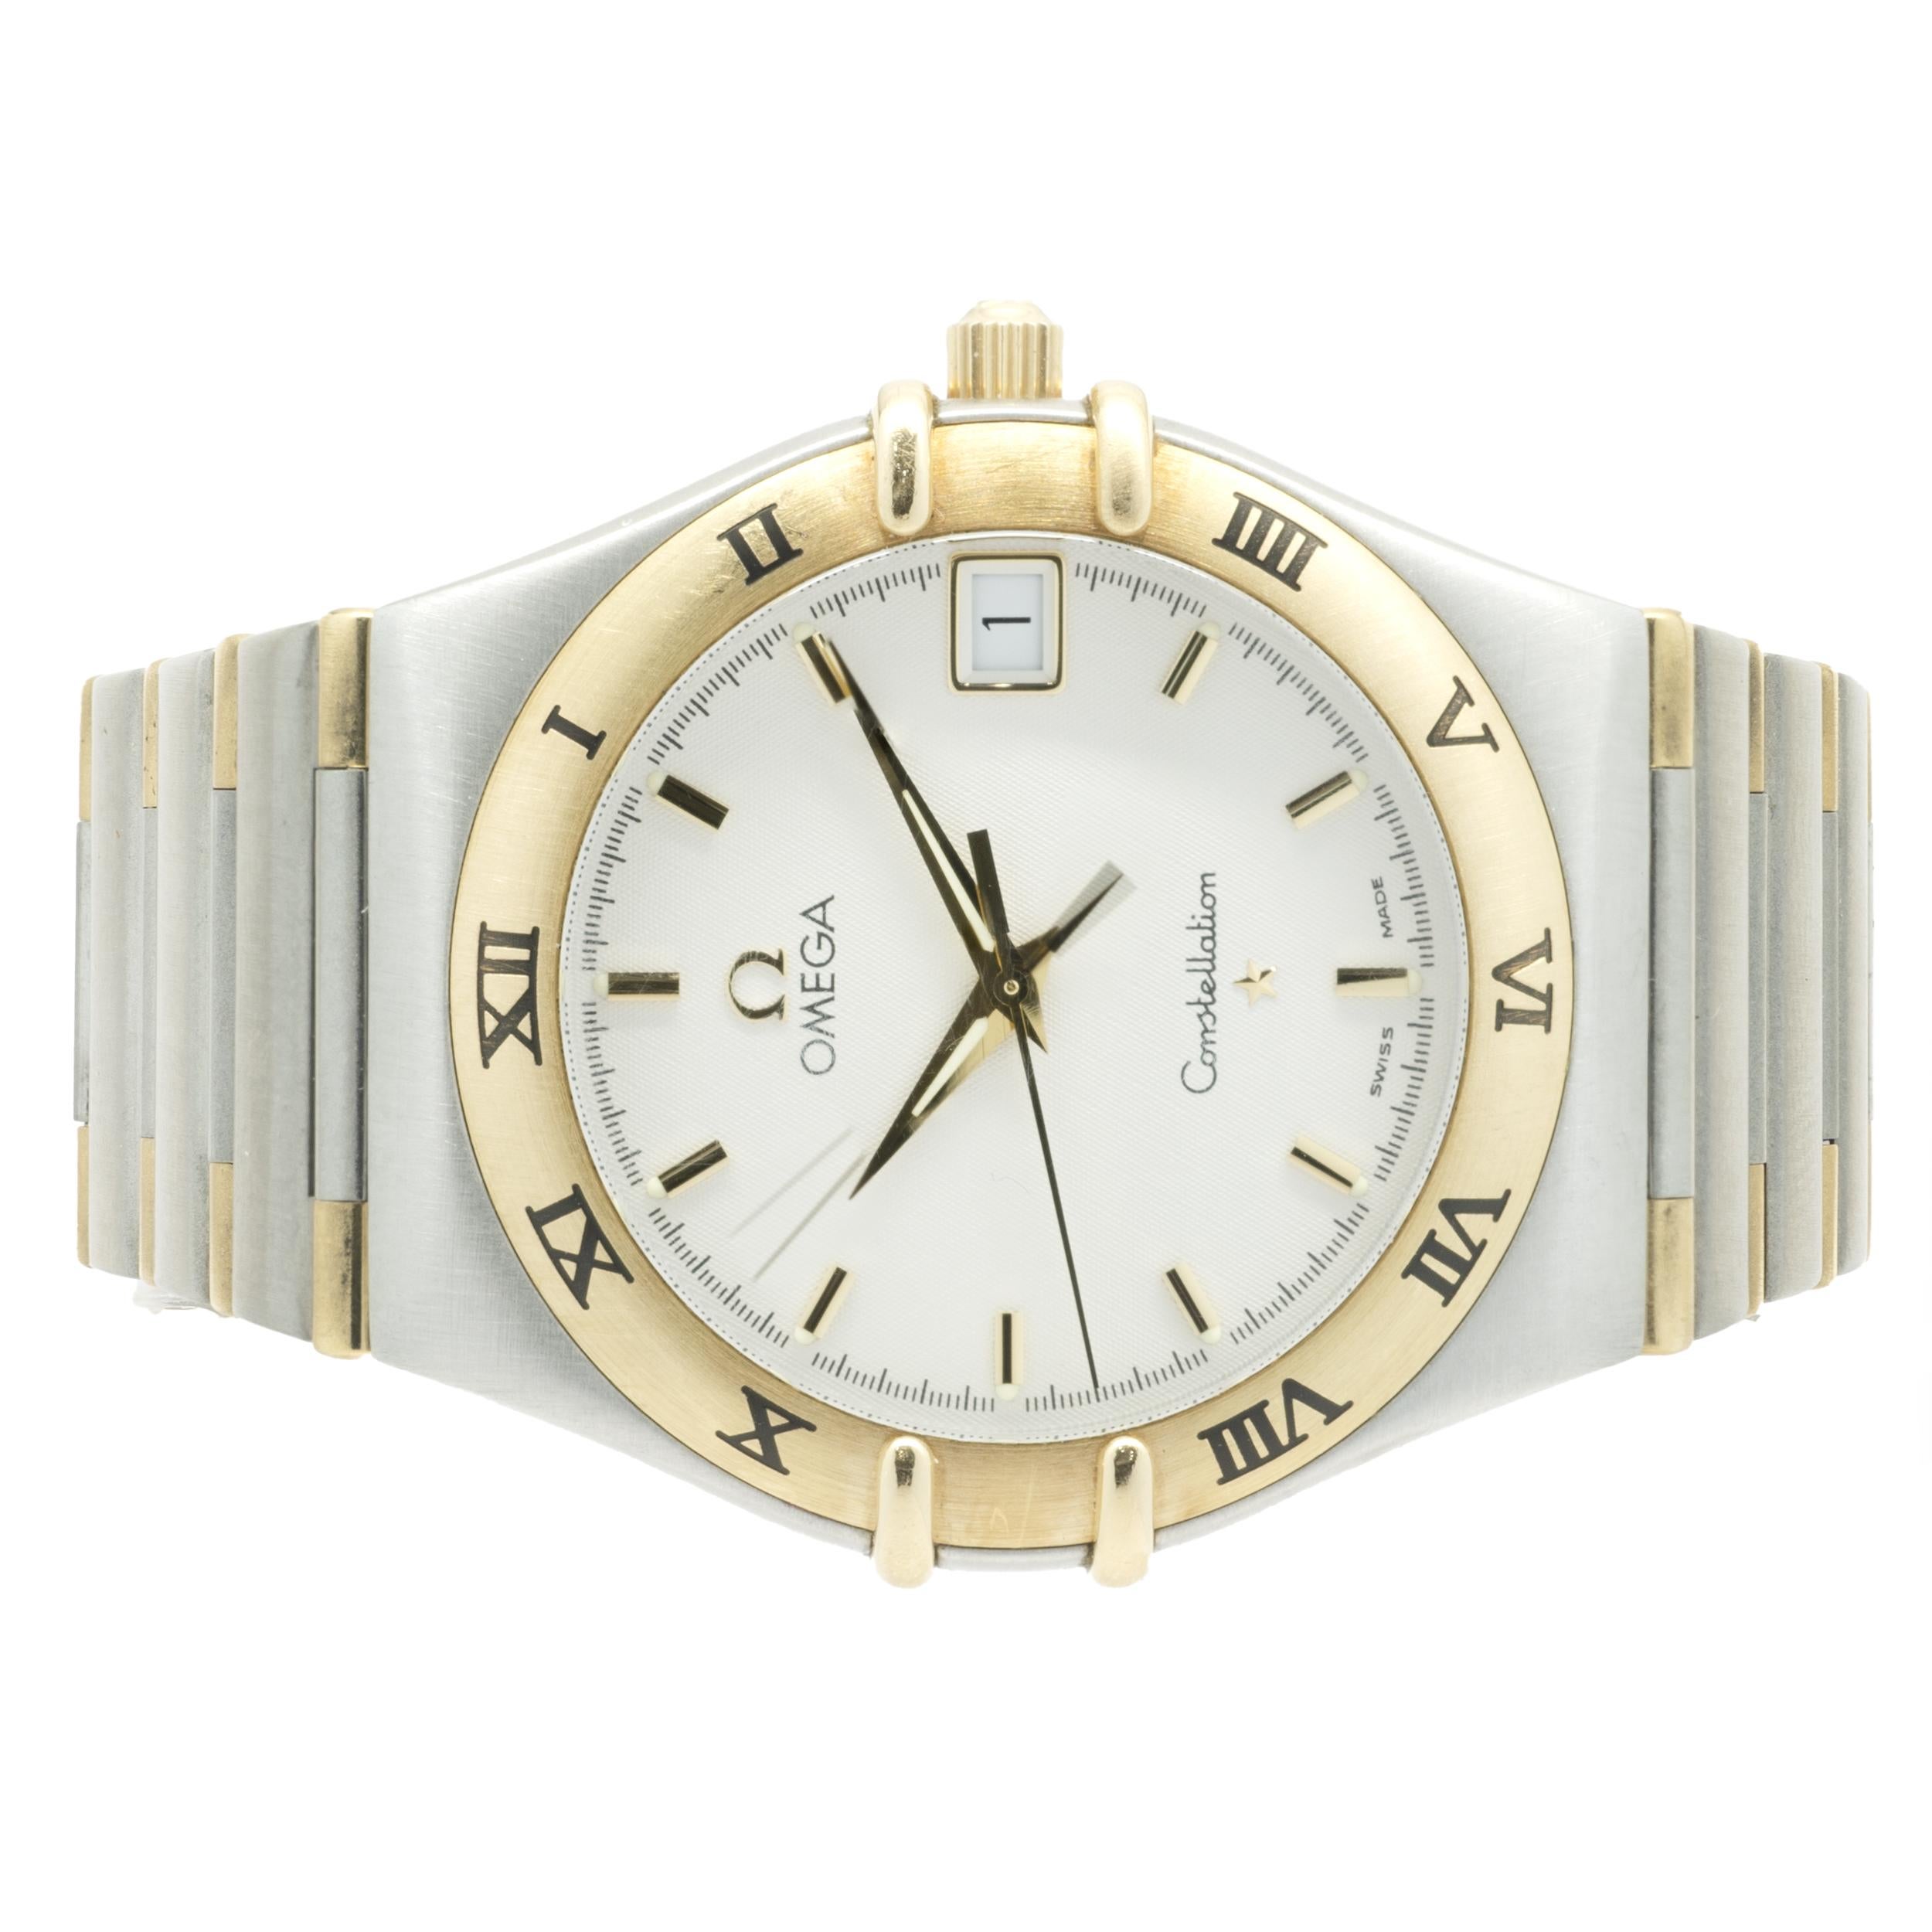 Brand: Omega
Movement: quartz
Function: hour, minutes, seconds, date
Case: 33mm stainless steel round case, 18K yellow gold bezel, sapphire crystal, screw down crown
Band: stainless steel & 18K yellow gold seamaster bracelet
Dial: white stick